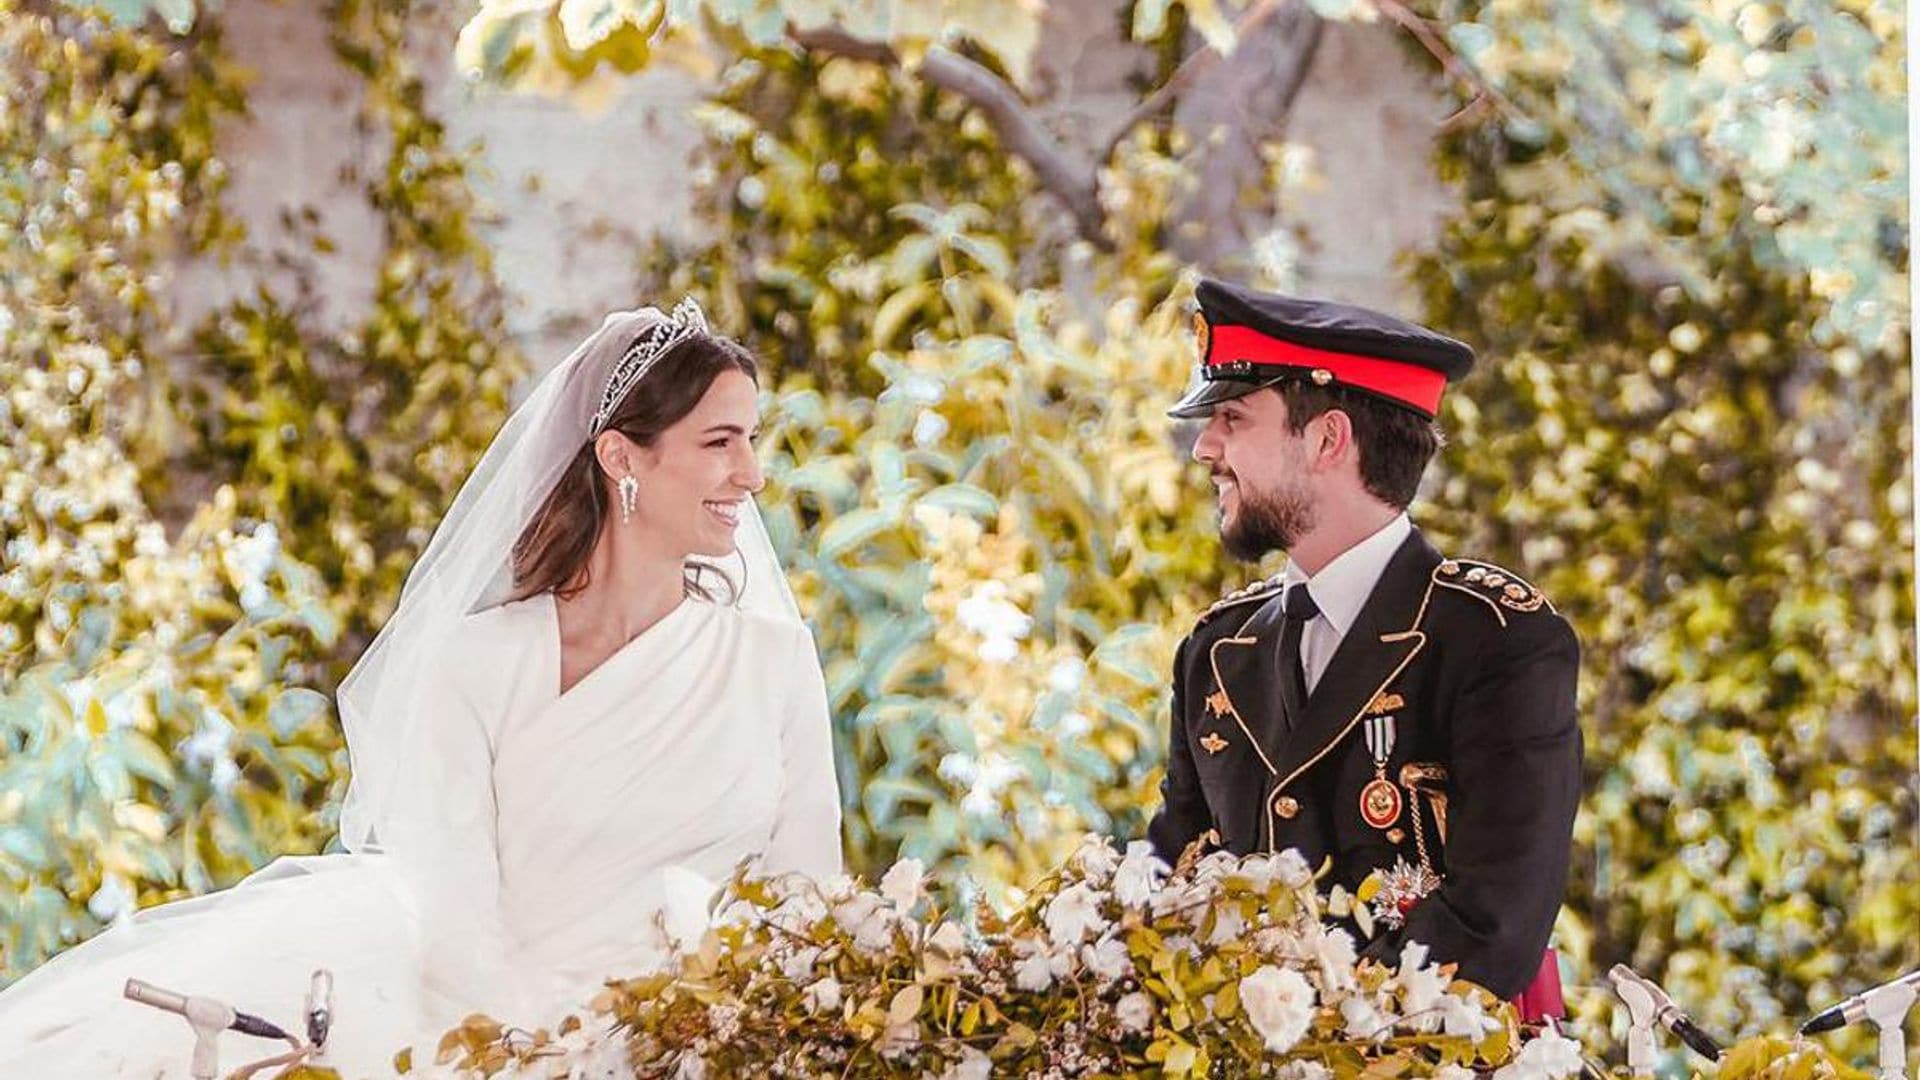 Every must-see photo from Crown Prince Hussein and Princess Rajwa's wedding ceremony